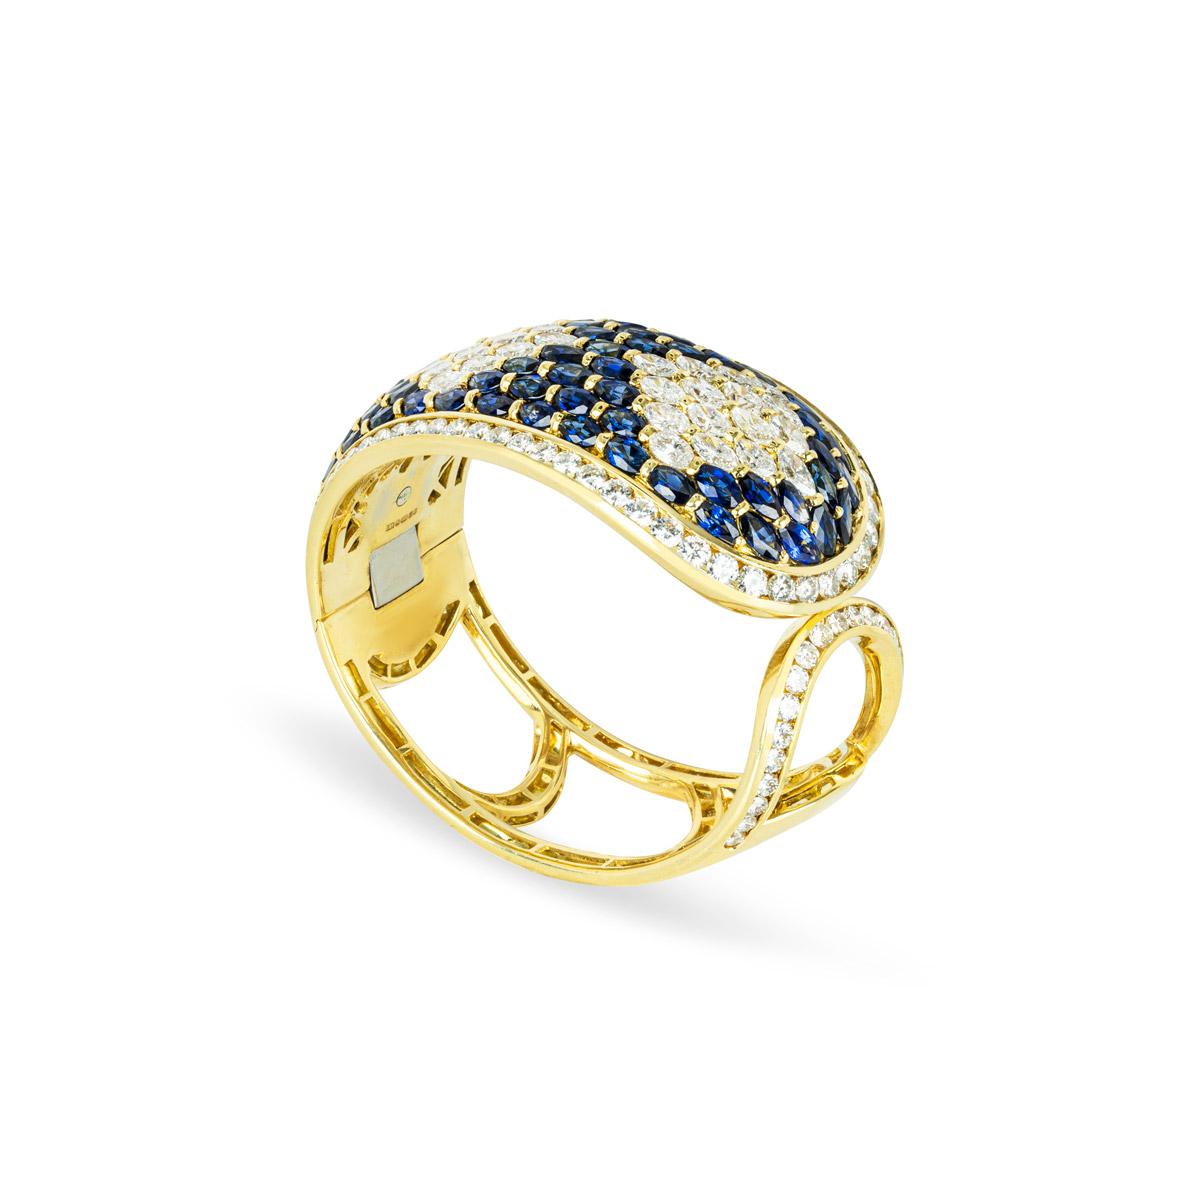 A stunning 18k yellow gold sapphire and diamond cuff bangle. The bangle comprises of a cuff style encrusted with 40 marquise cut diamonds forming 3 diamonds shaped illusion. Complementing this are 73 marquise cut sapphires around with round